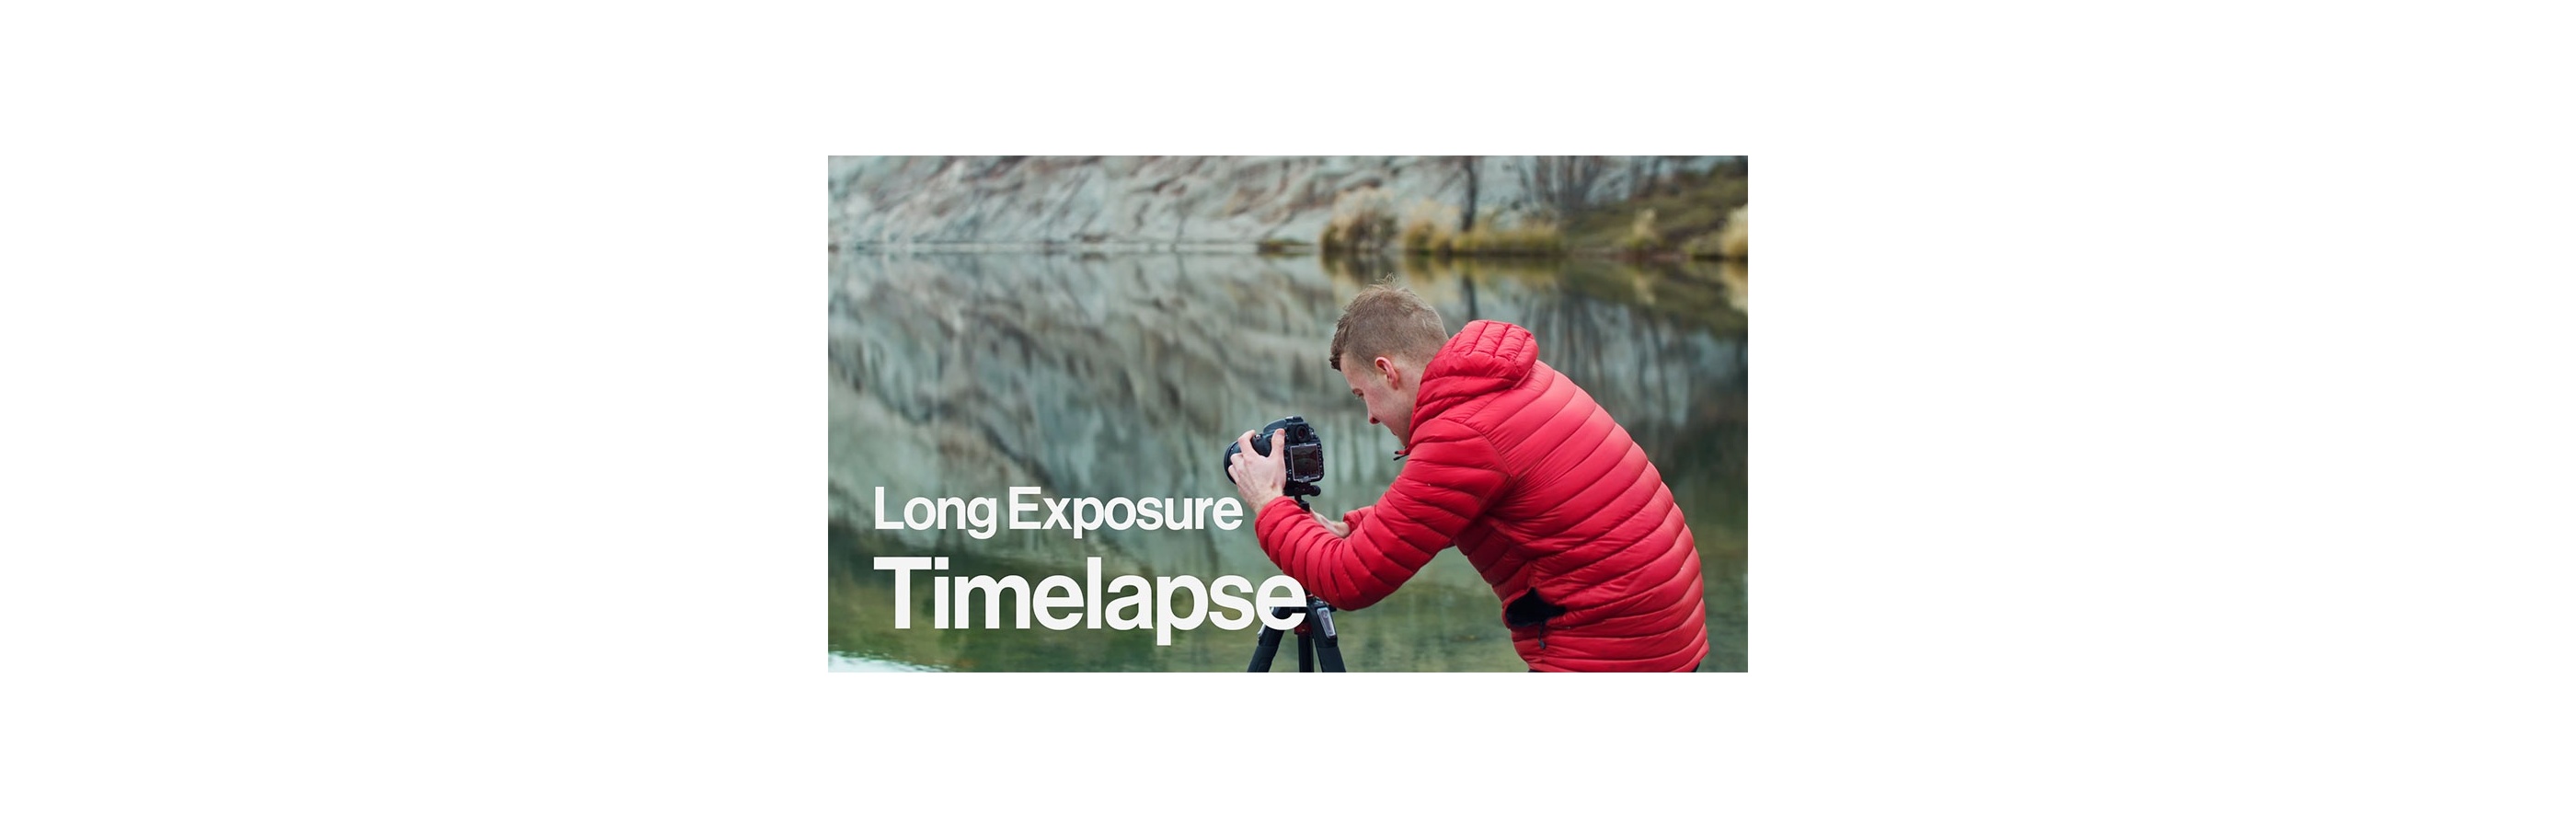 How to Set Up a Long Exposure Panning Time-lapse - Sam Deuchrass